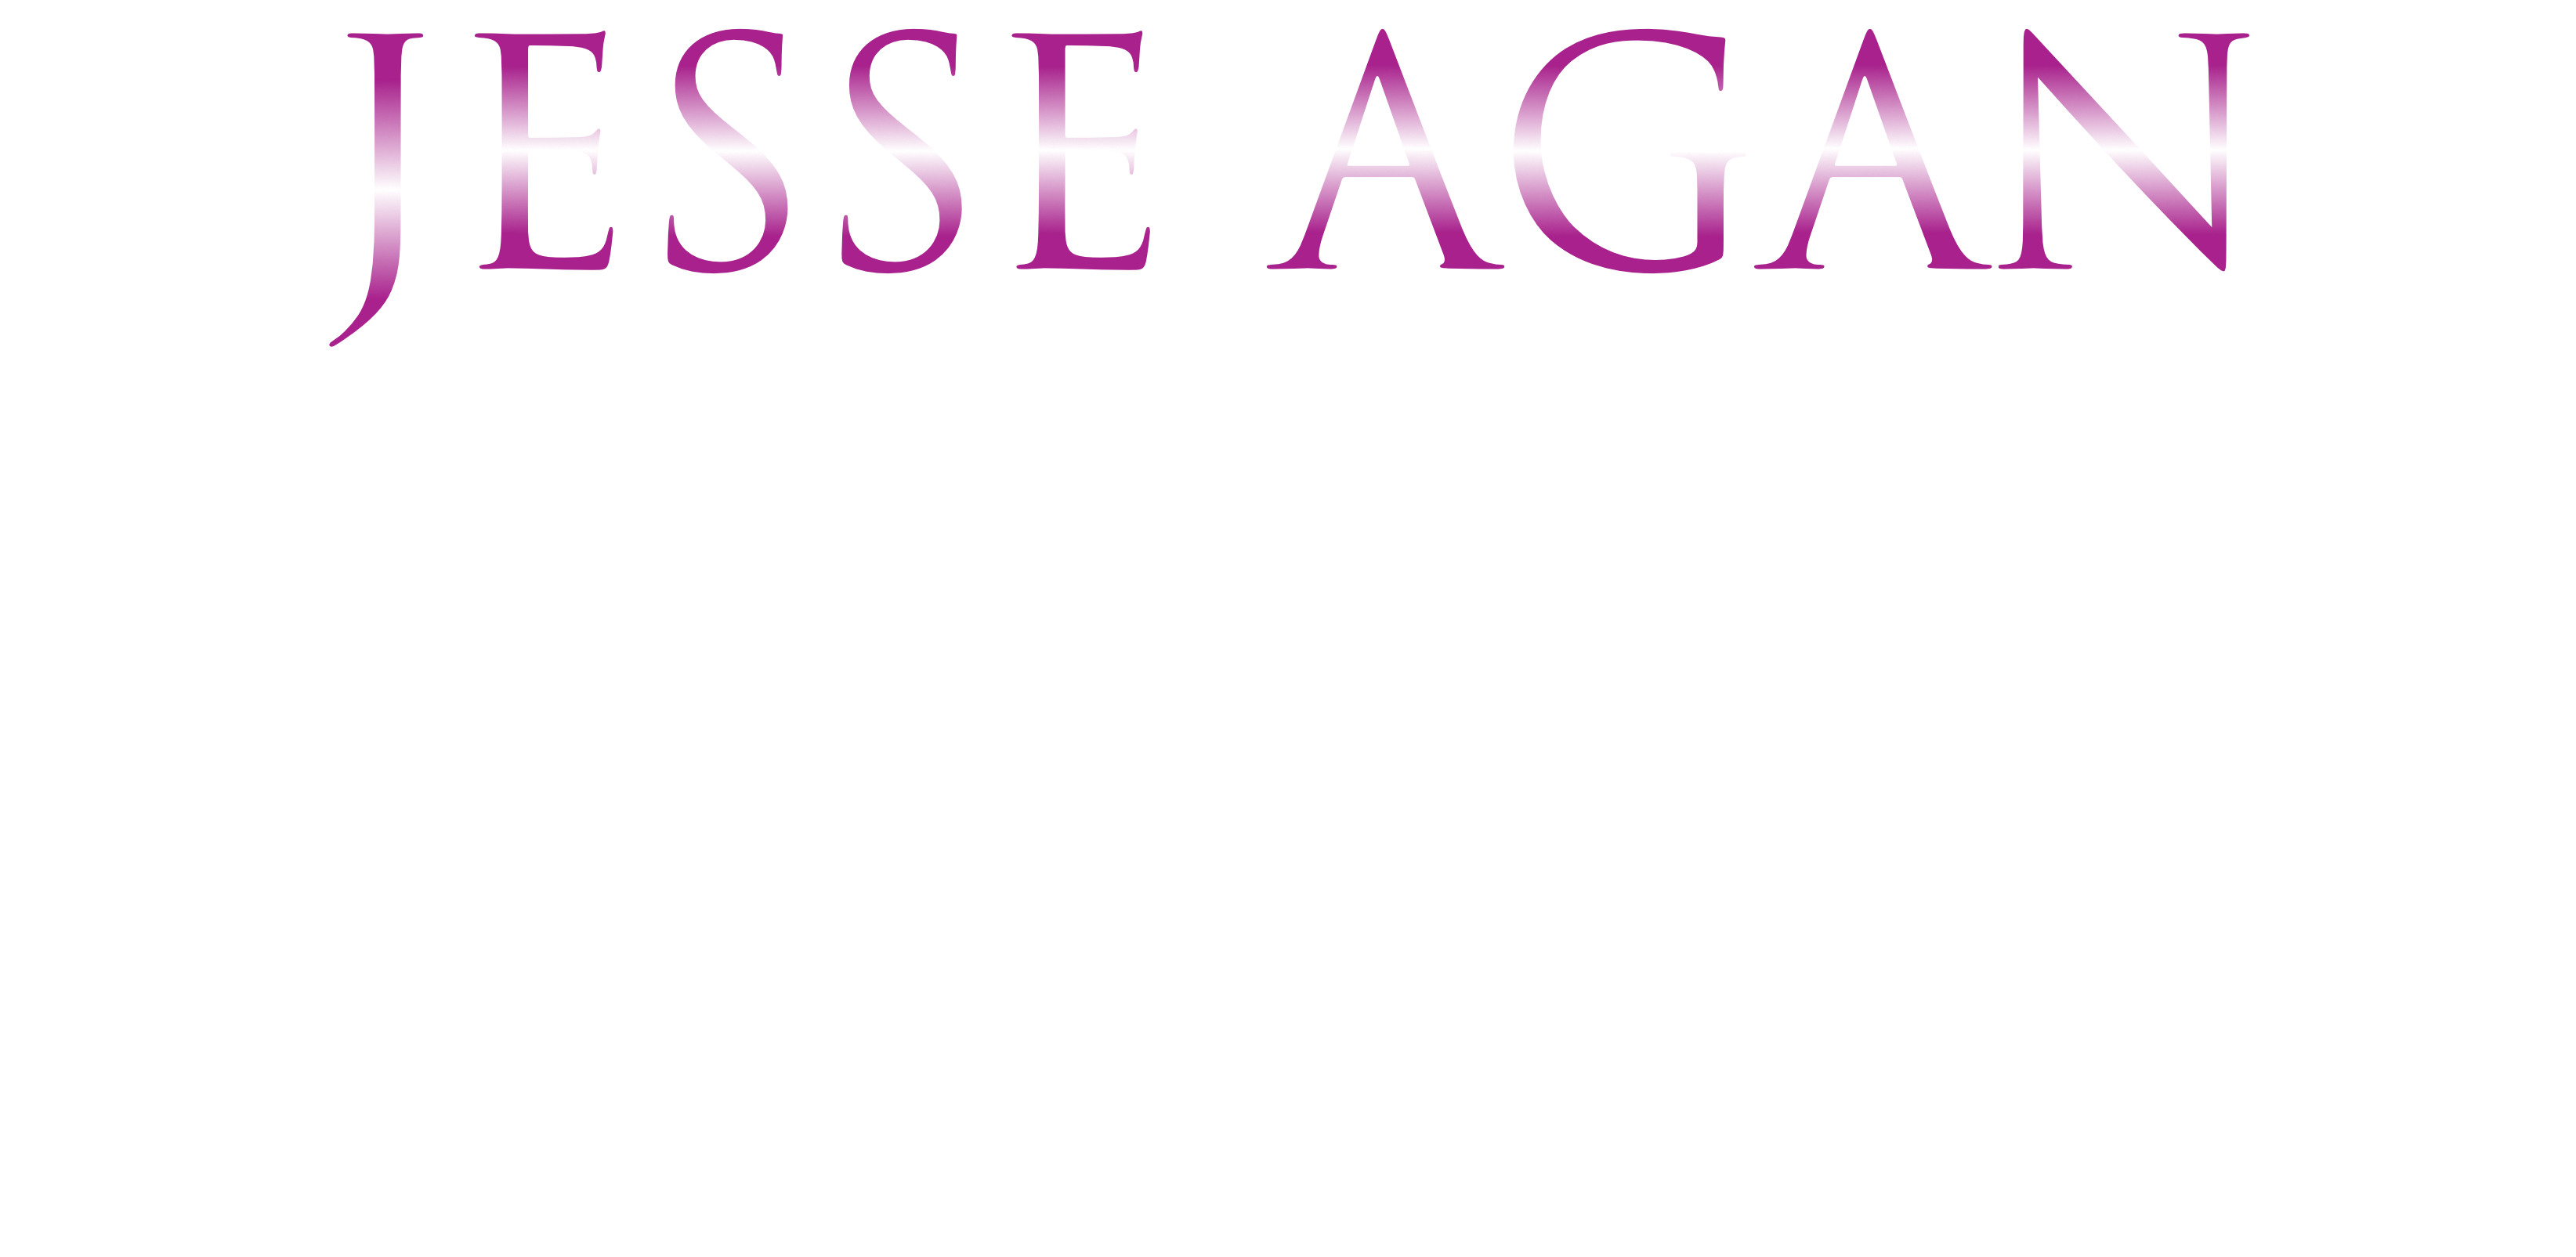 Jesse Agan - The Music of Queen